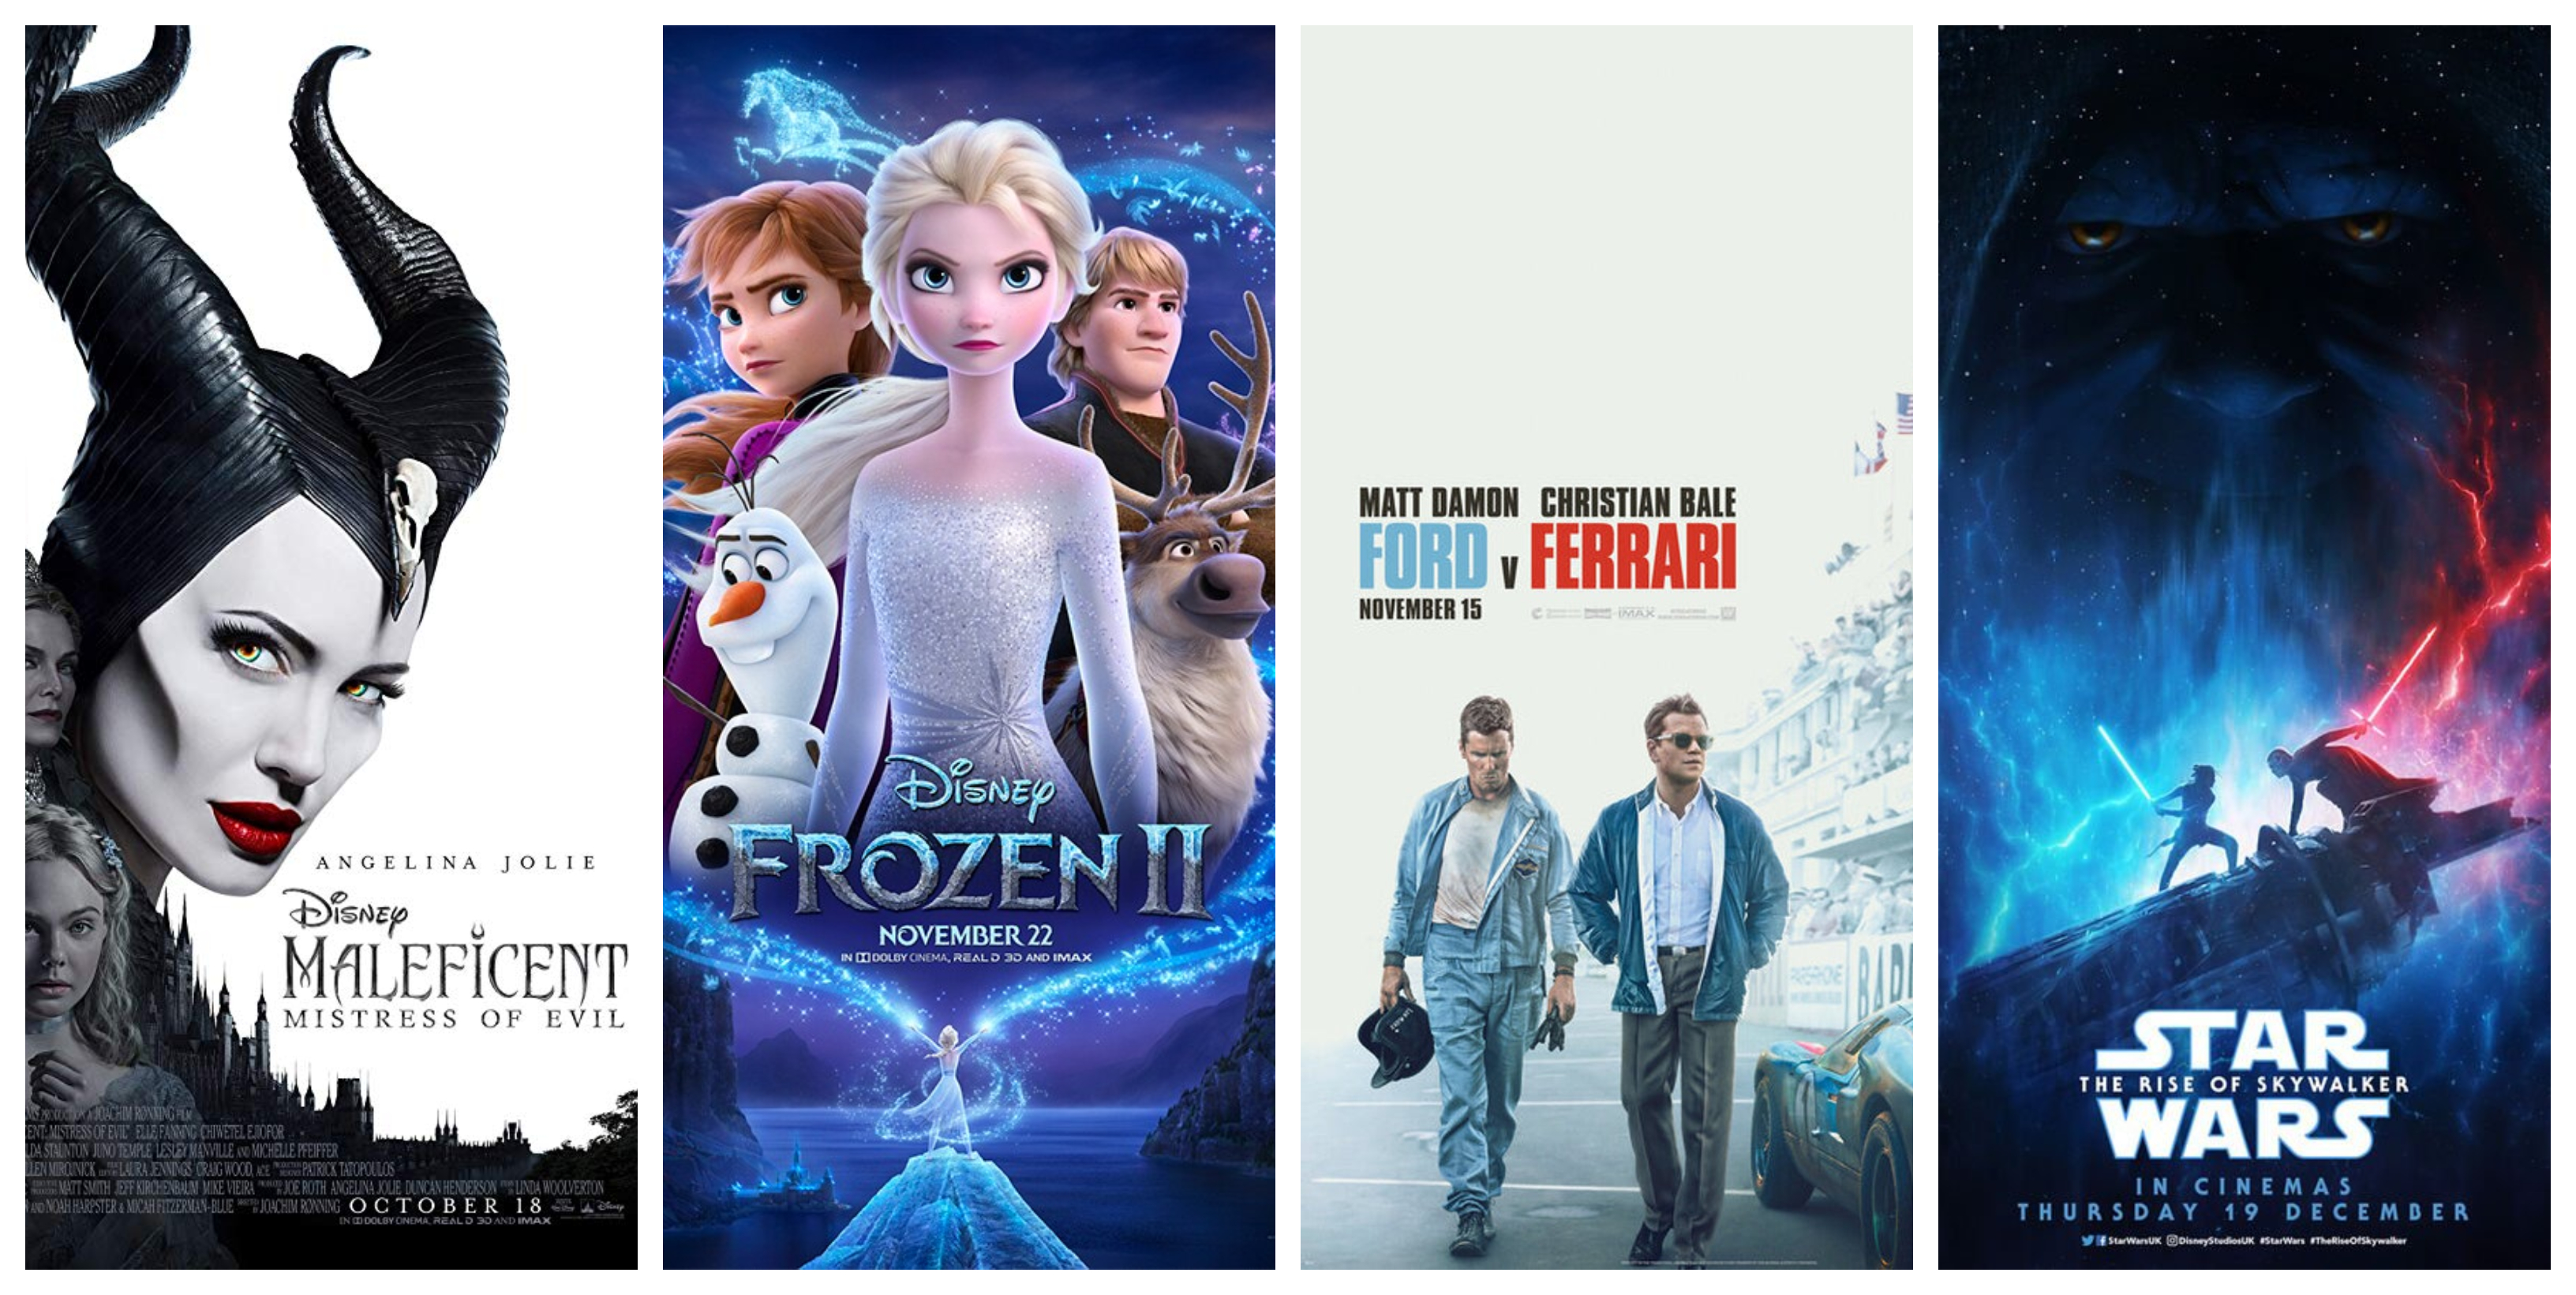 Disney’s Upcoming Premium Format Movie Releases from CJ 4DPLEX in 4DX and ScreenX